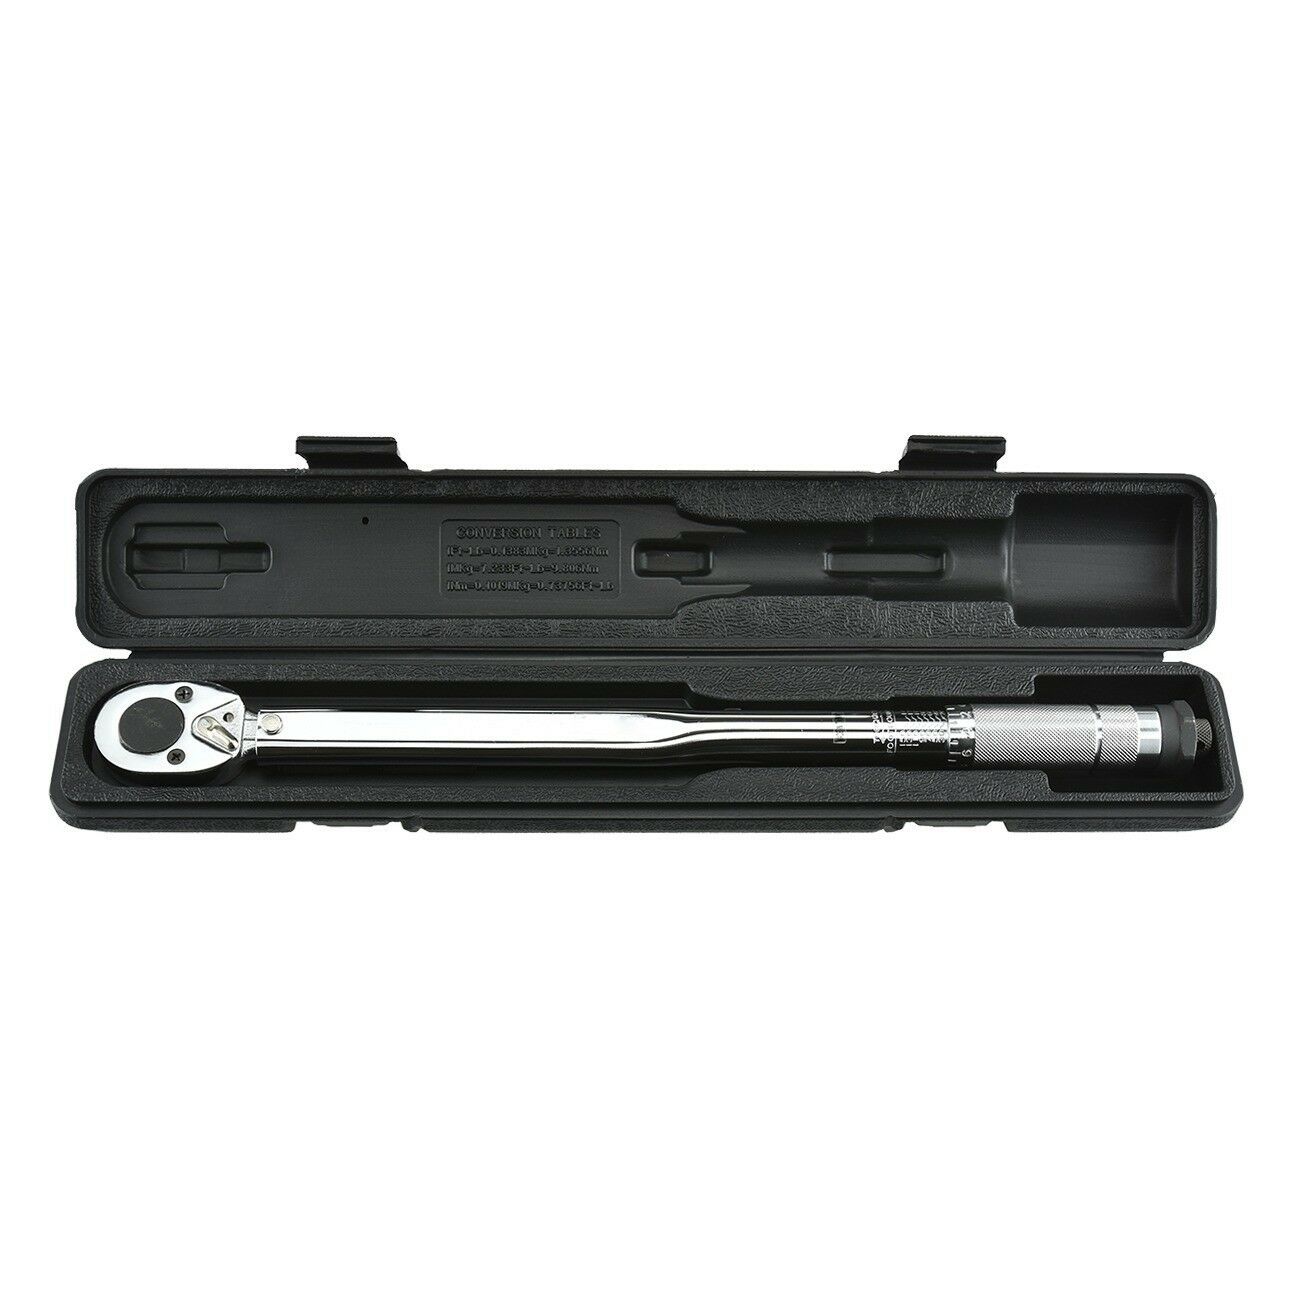 3/8" Drive Adjustable Torque Wrench 120-960 In/lb Inch Pound